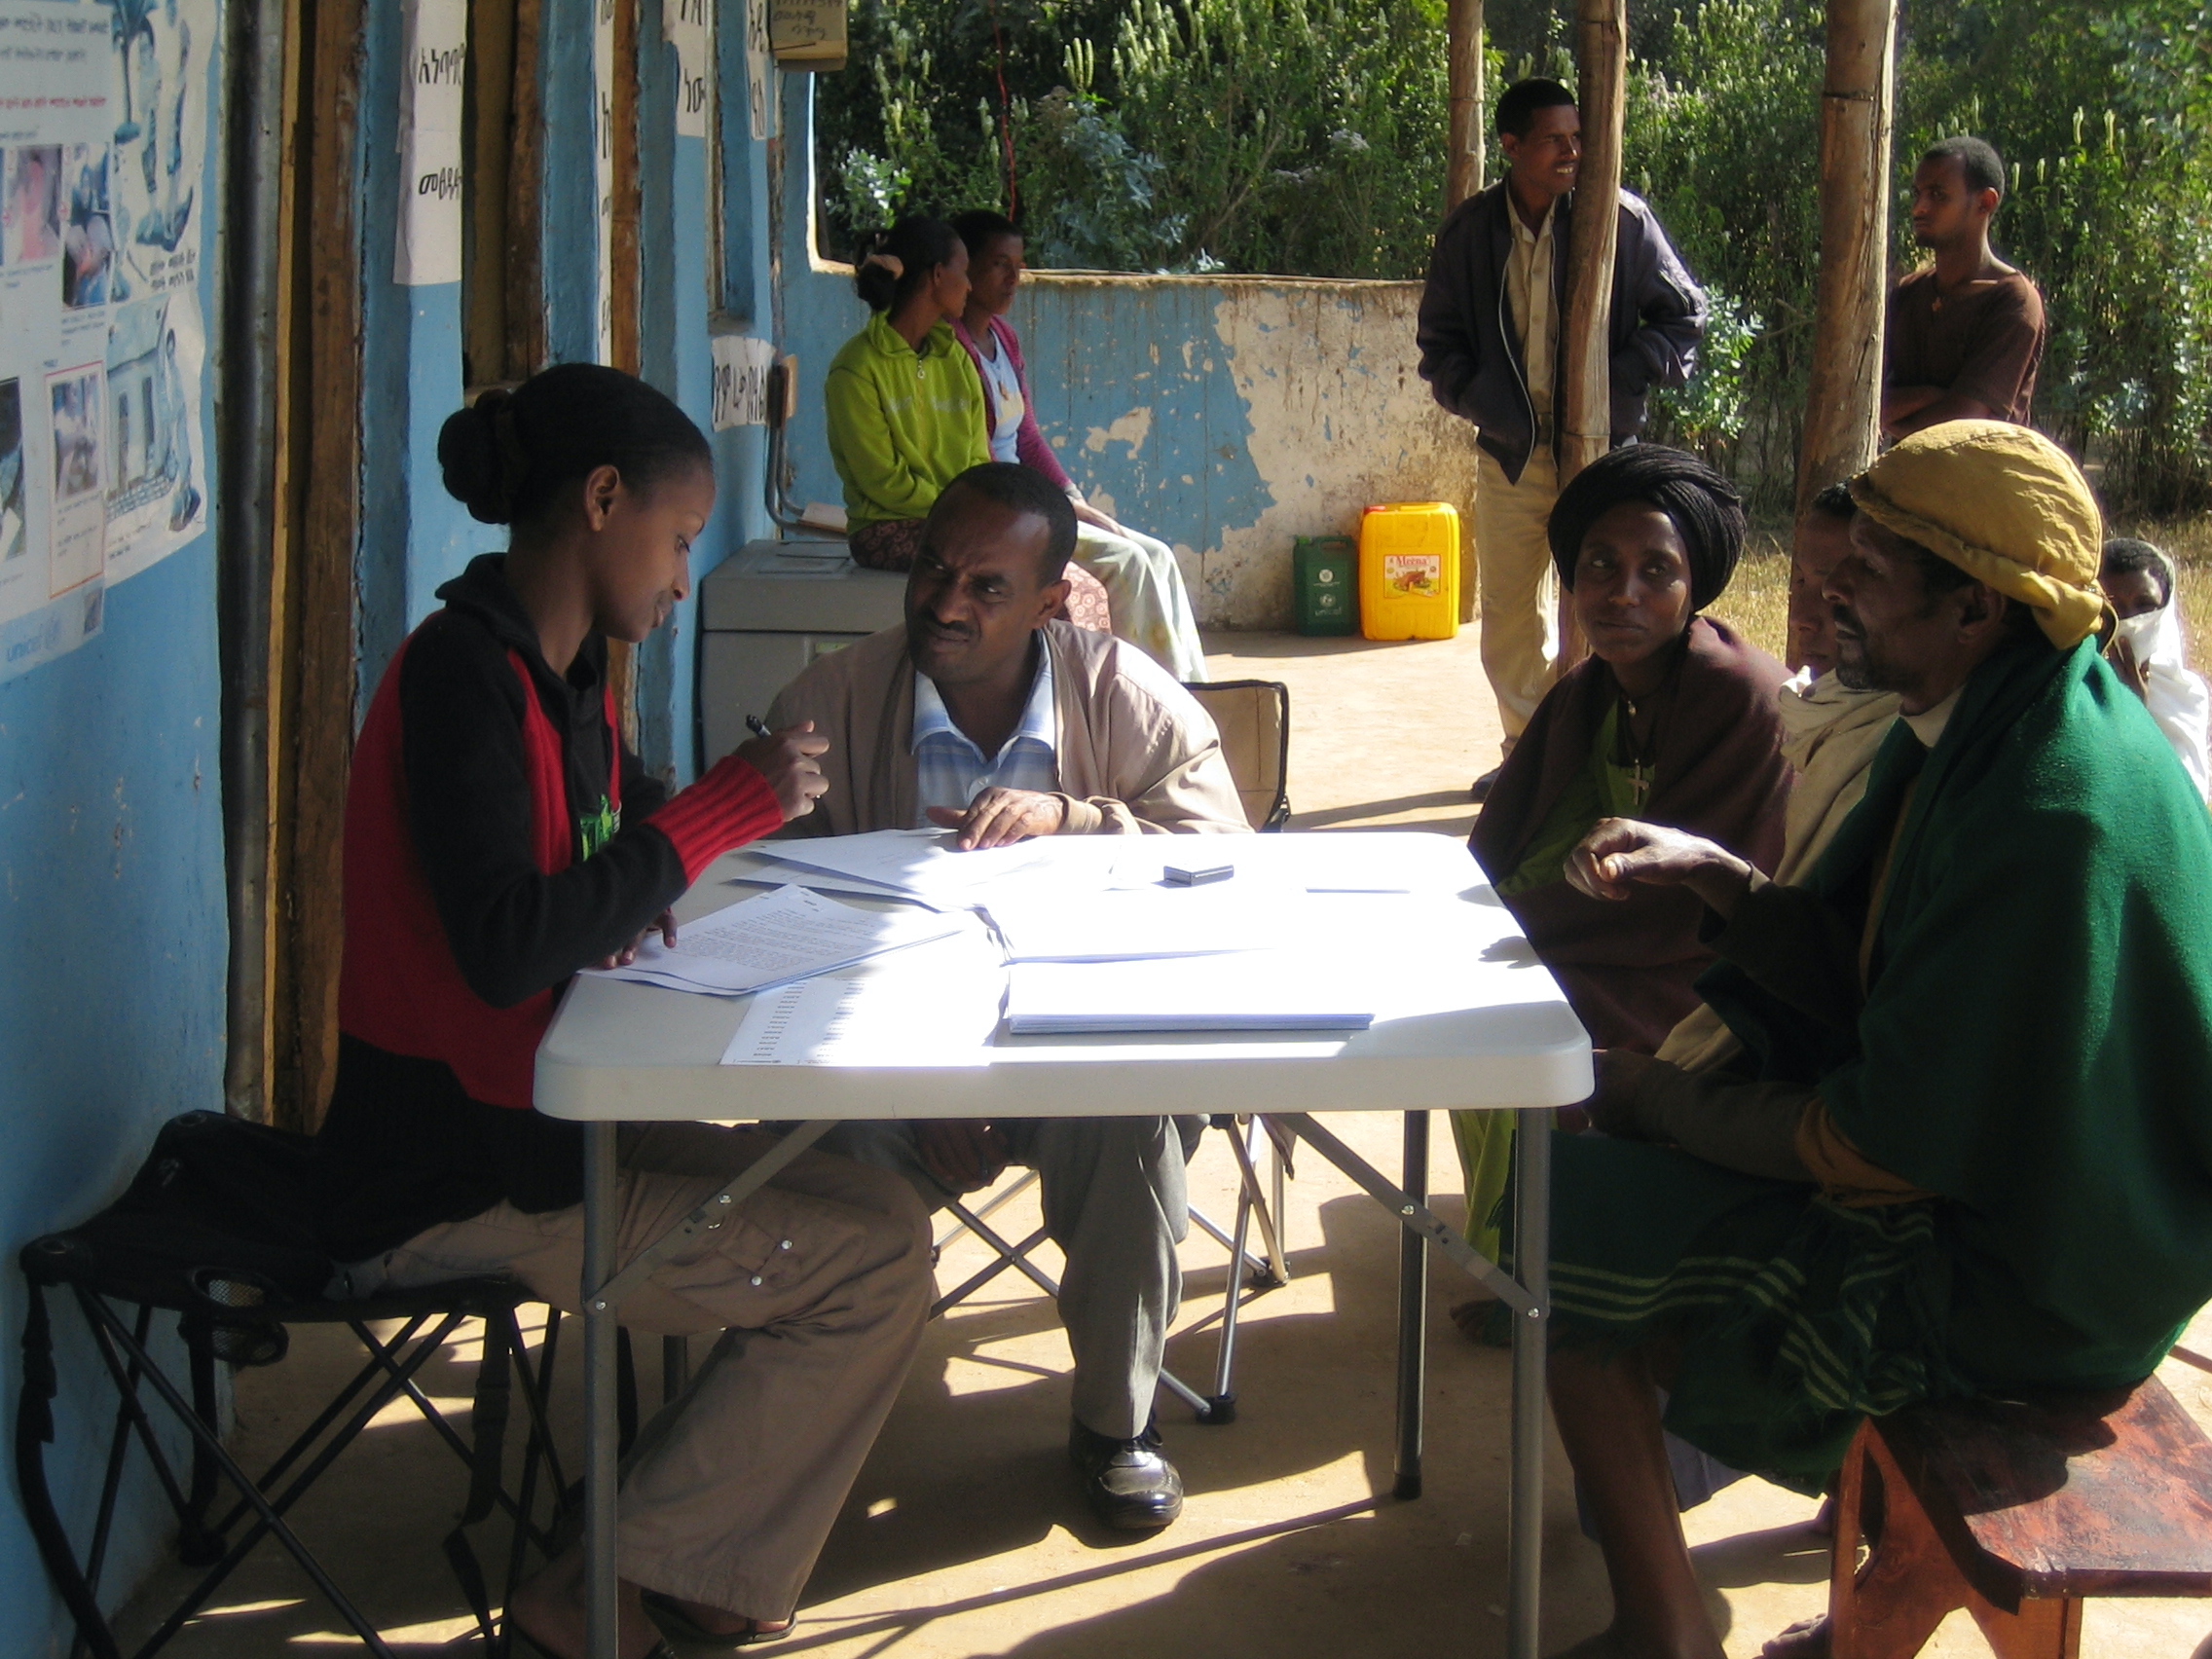 Researchers collecting ethnographic and medical information from participants in Ethiopia.